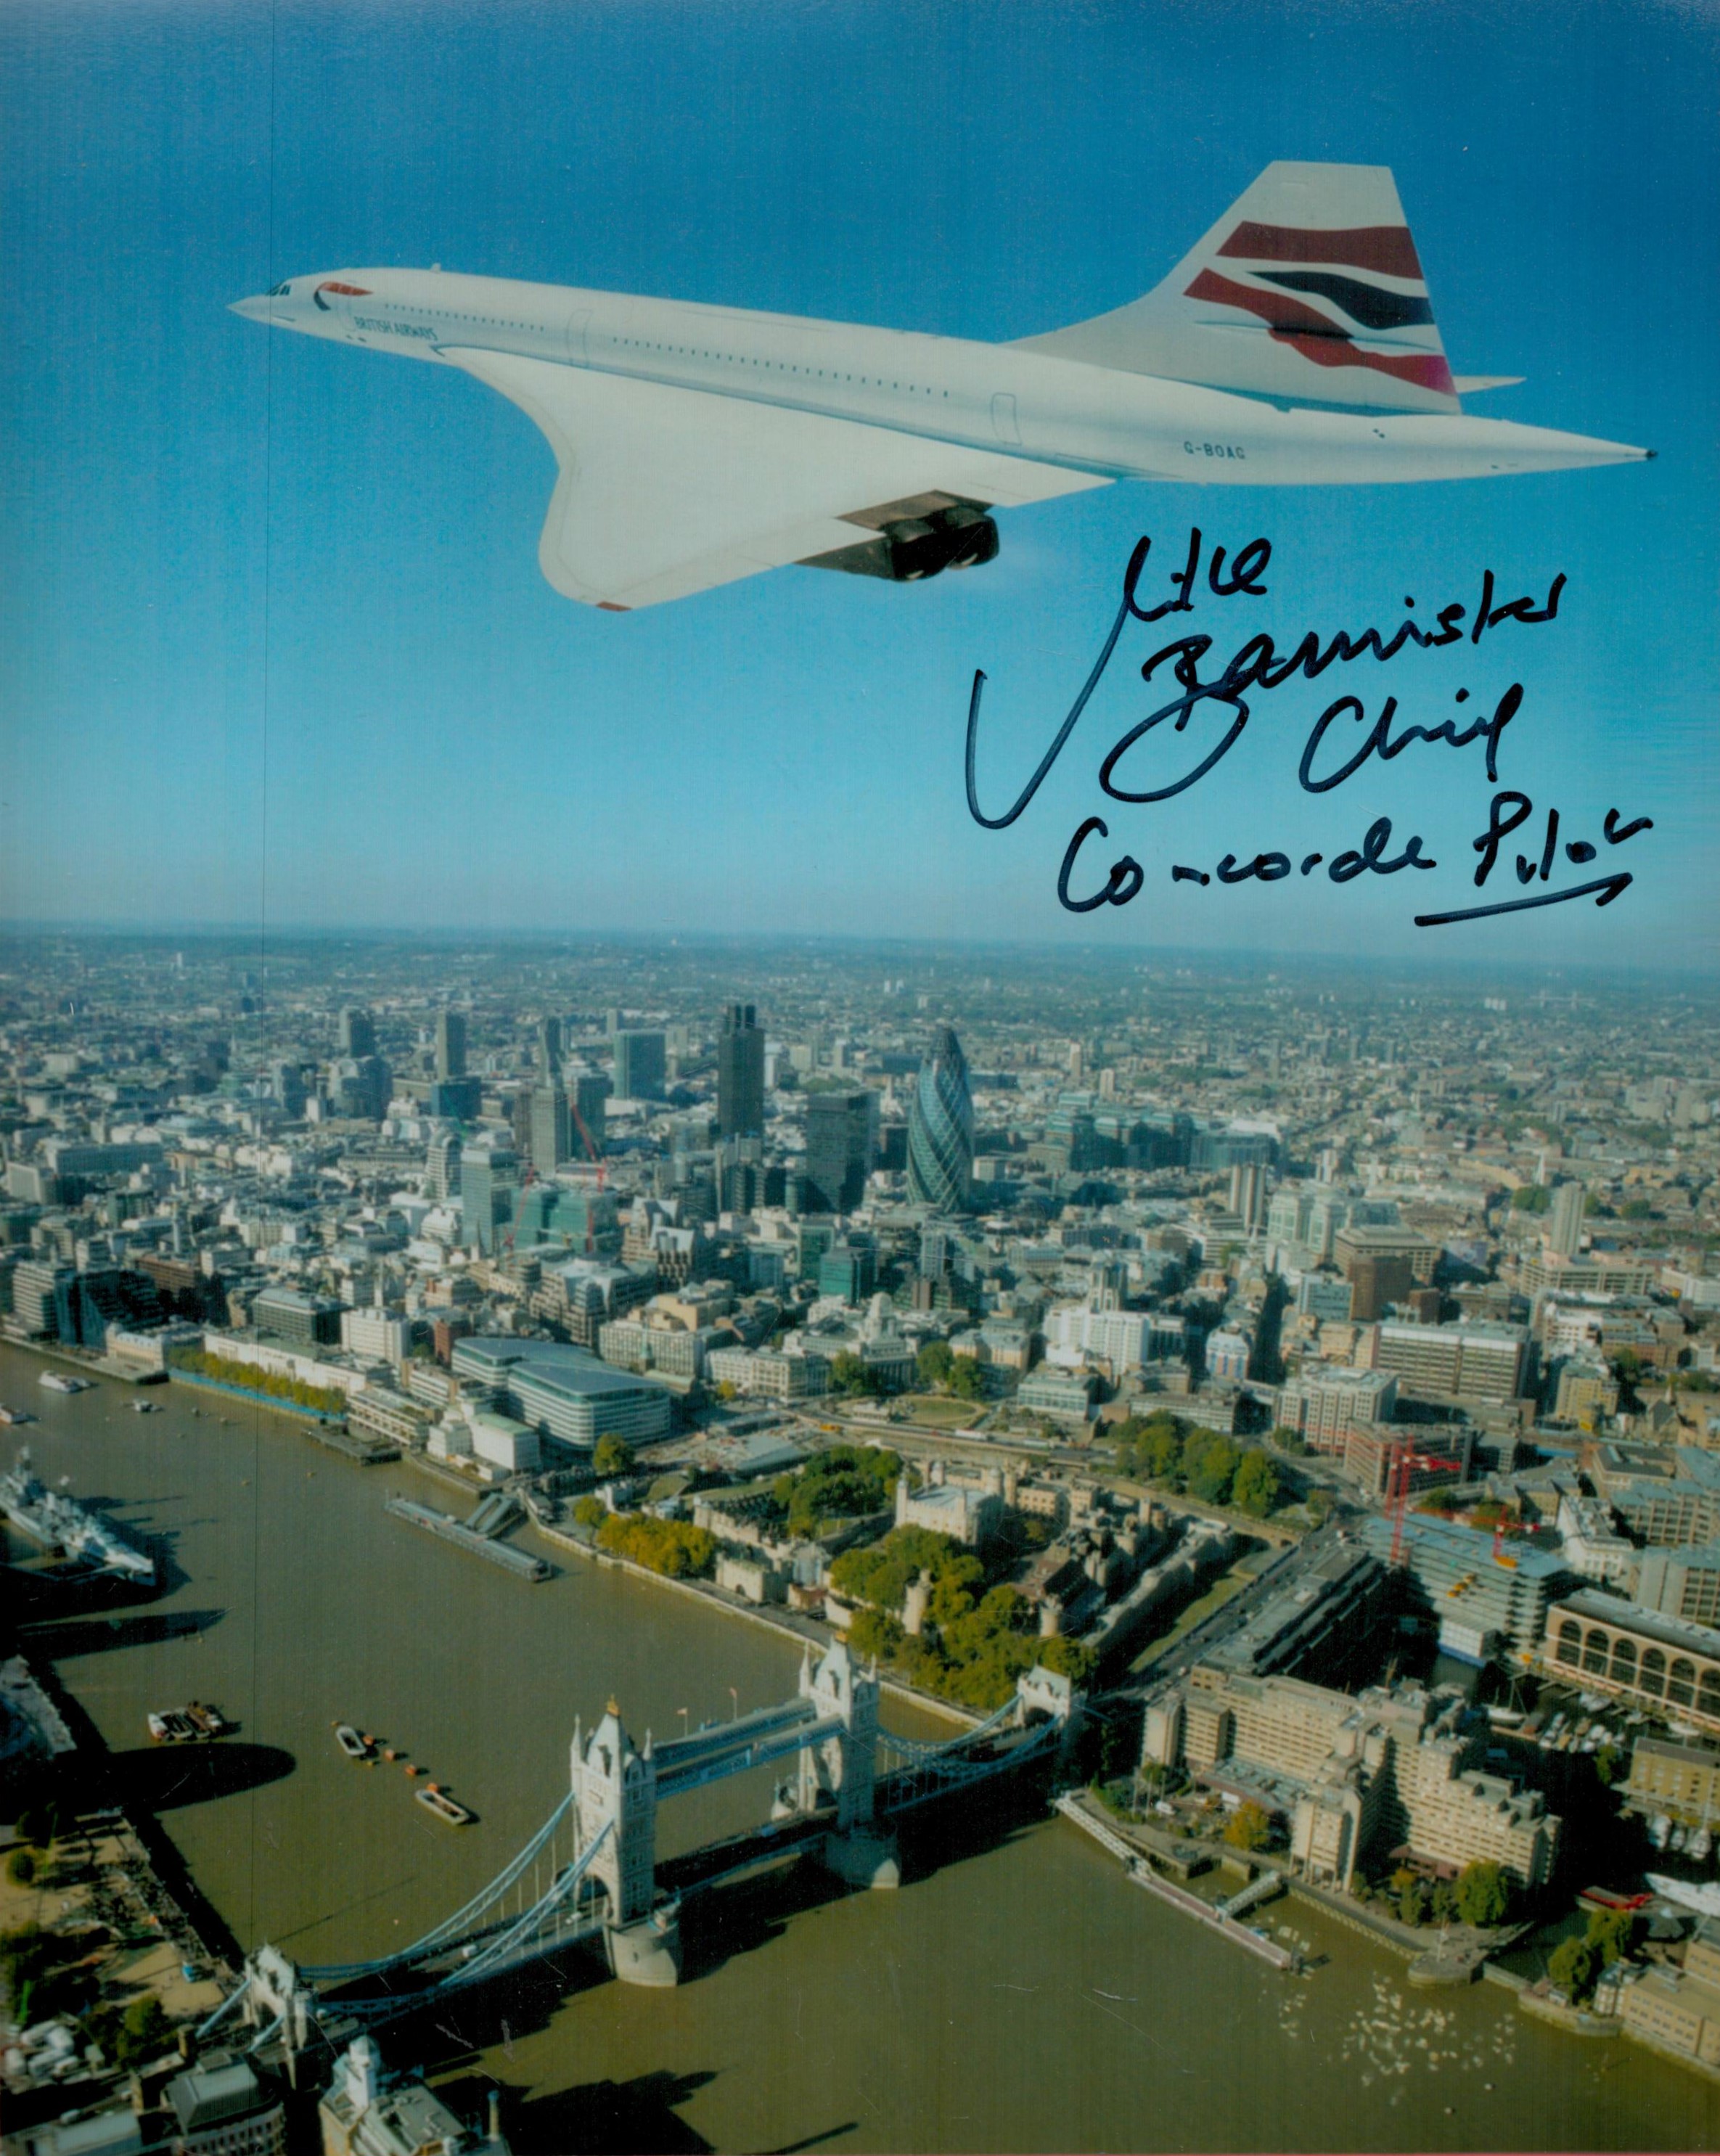 Concorde Chief Pilot Capt Mike Banister signed stunning 10 x 8 inch colour photo of the supersonic